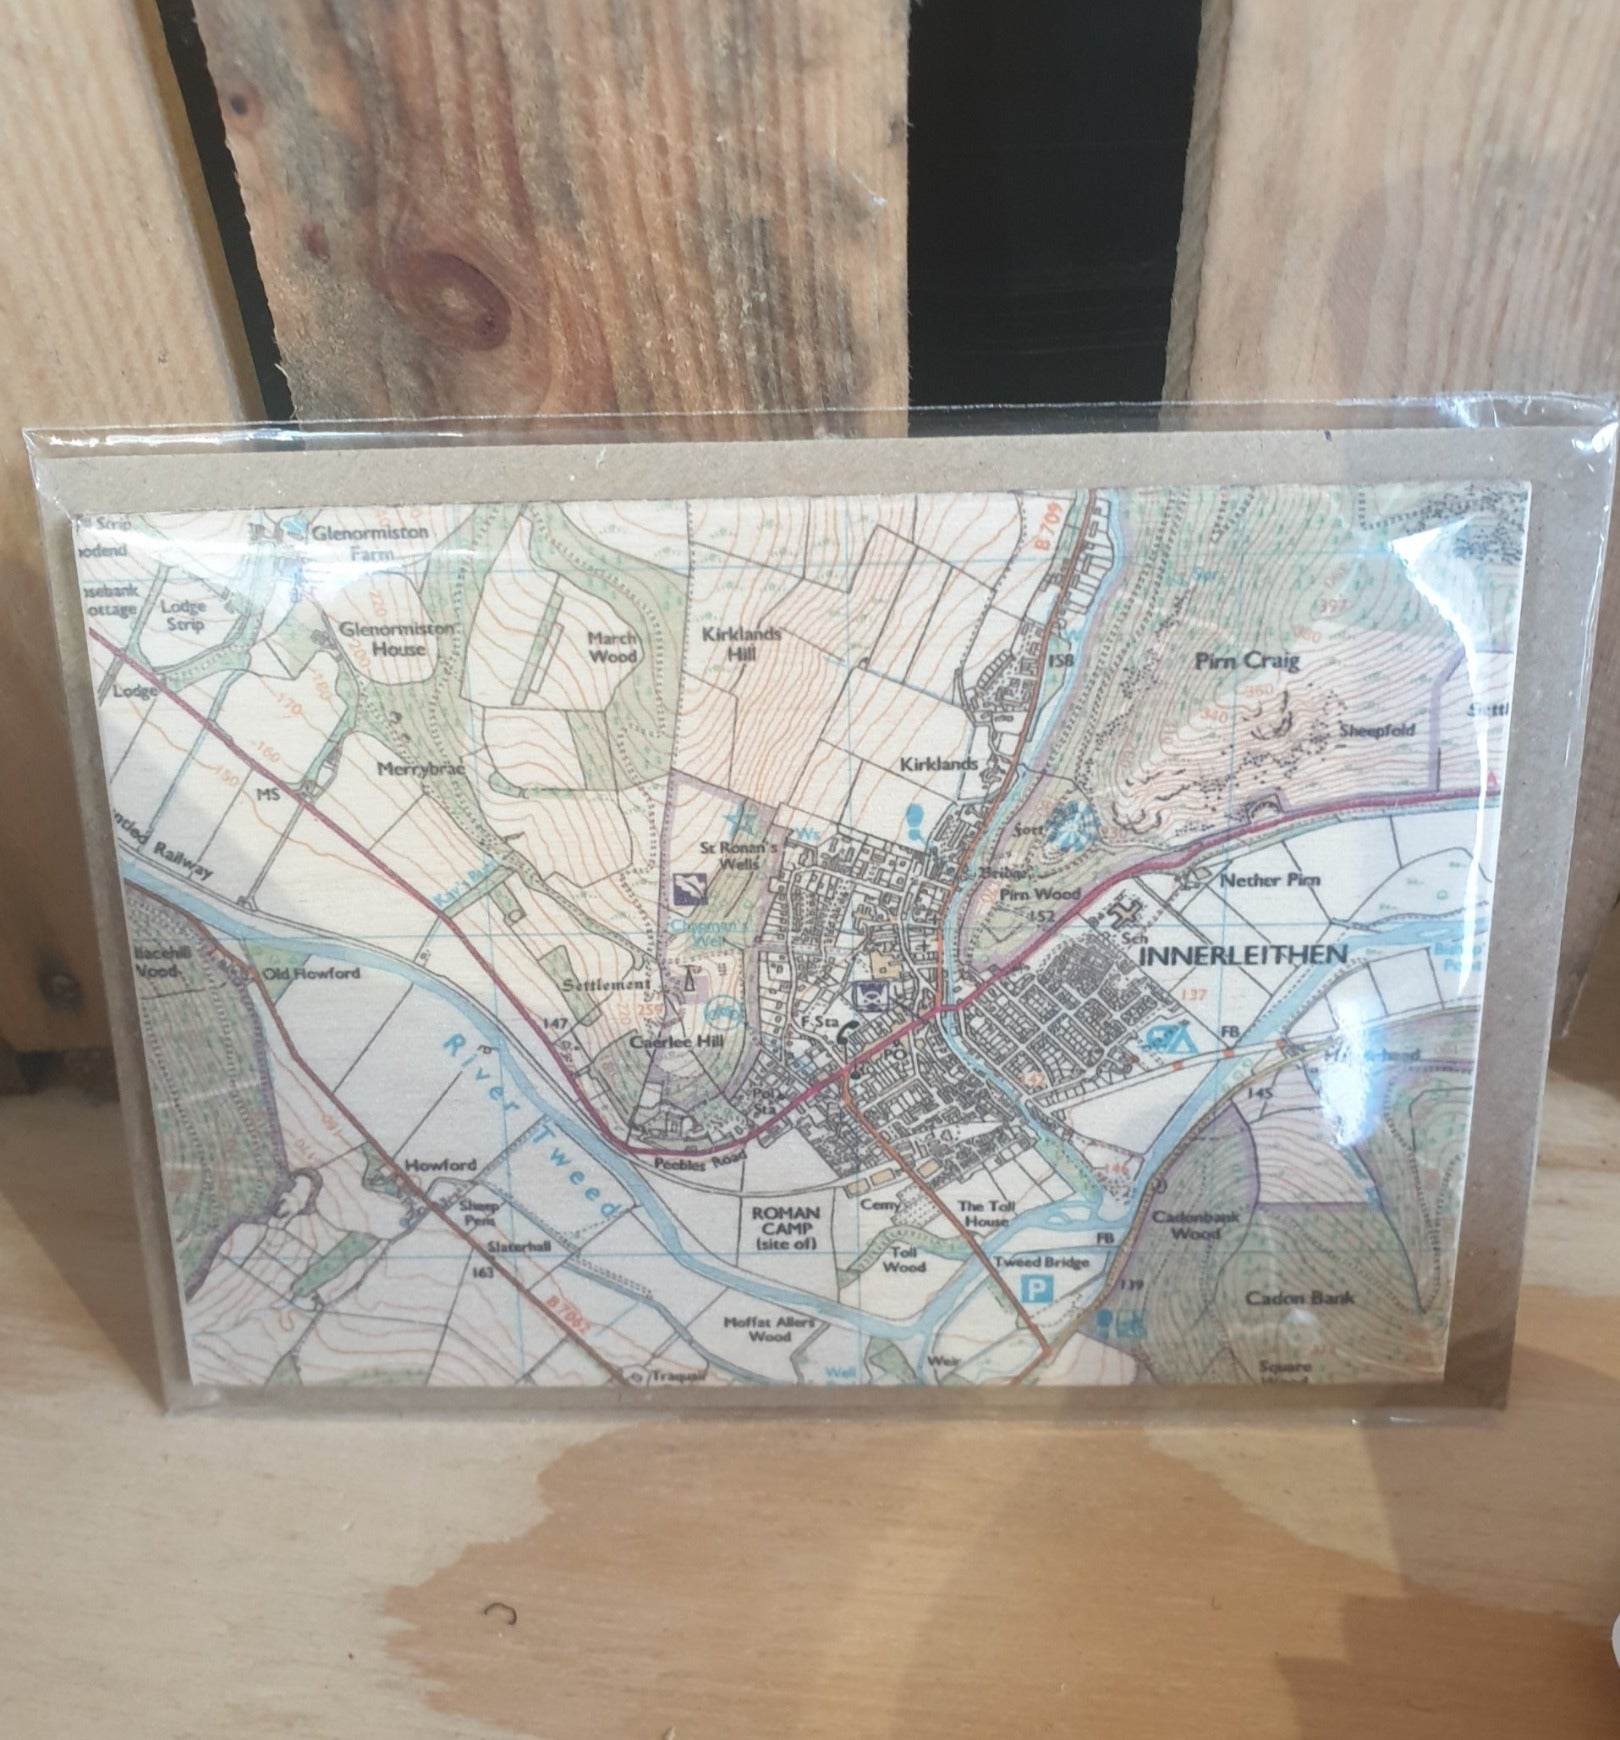 Wooden Postcard with Innerleithen Map by Sugar Shed